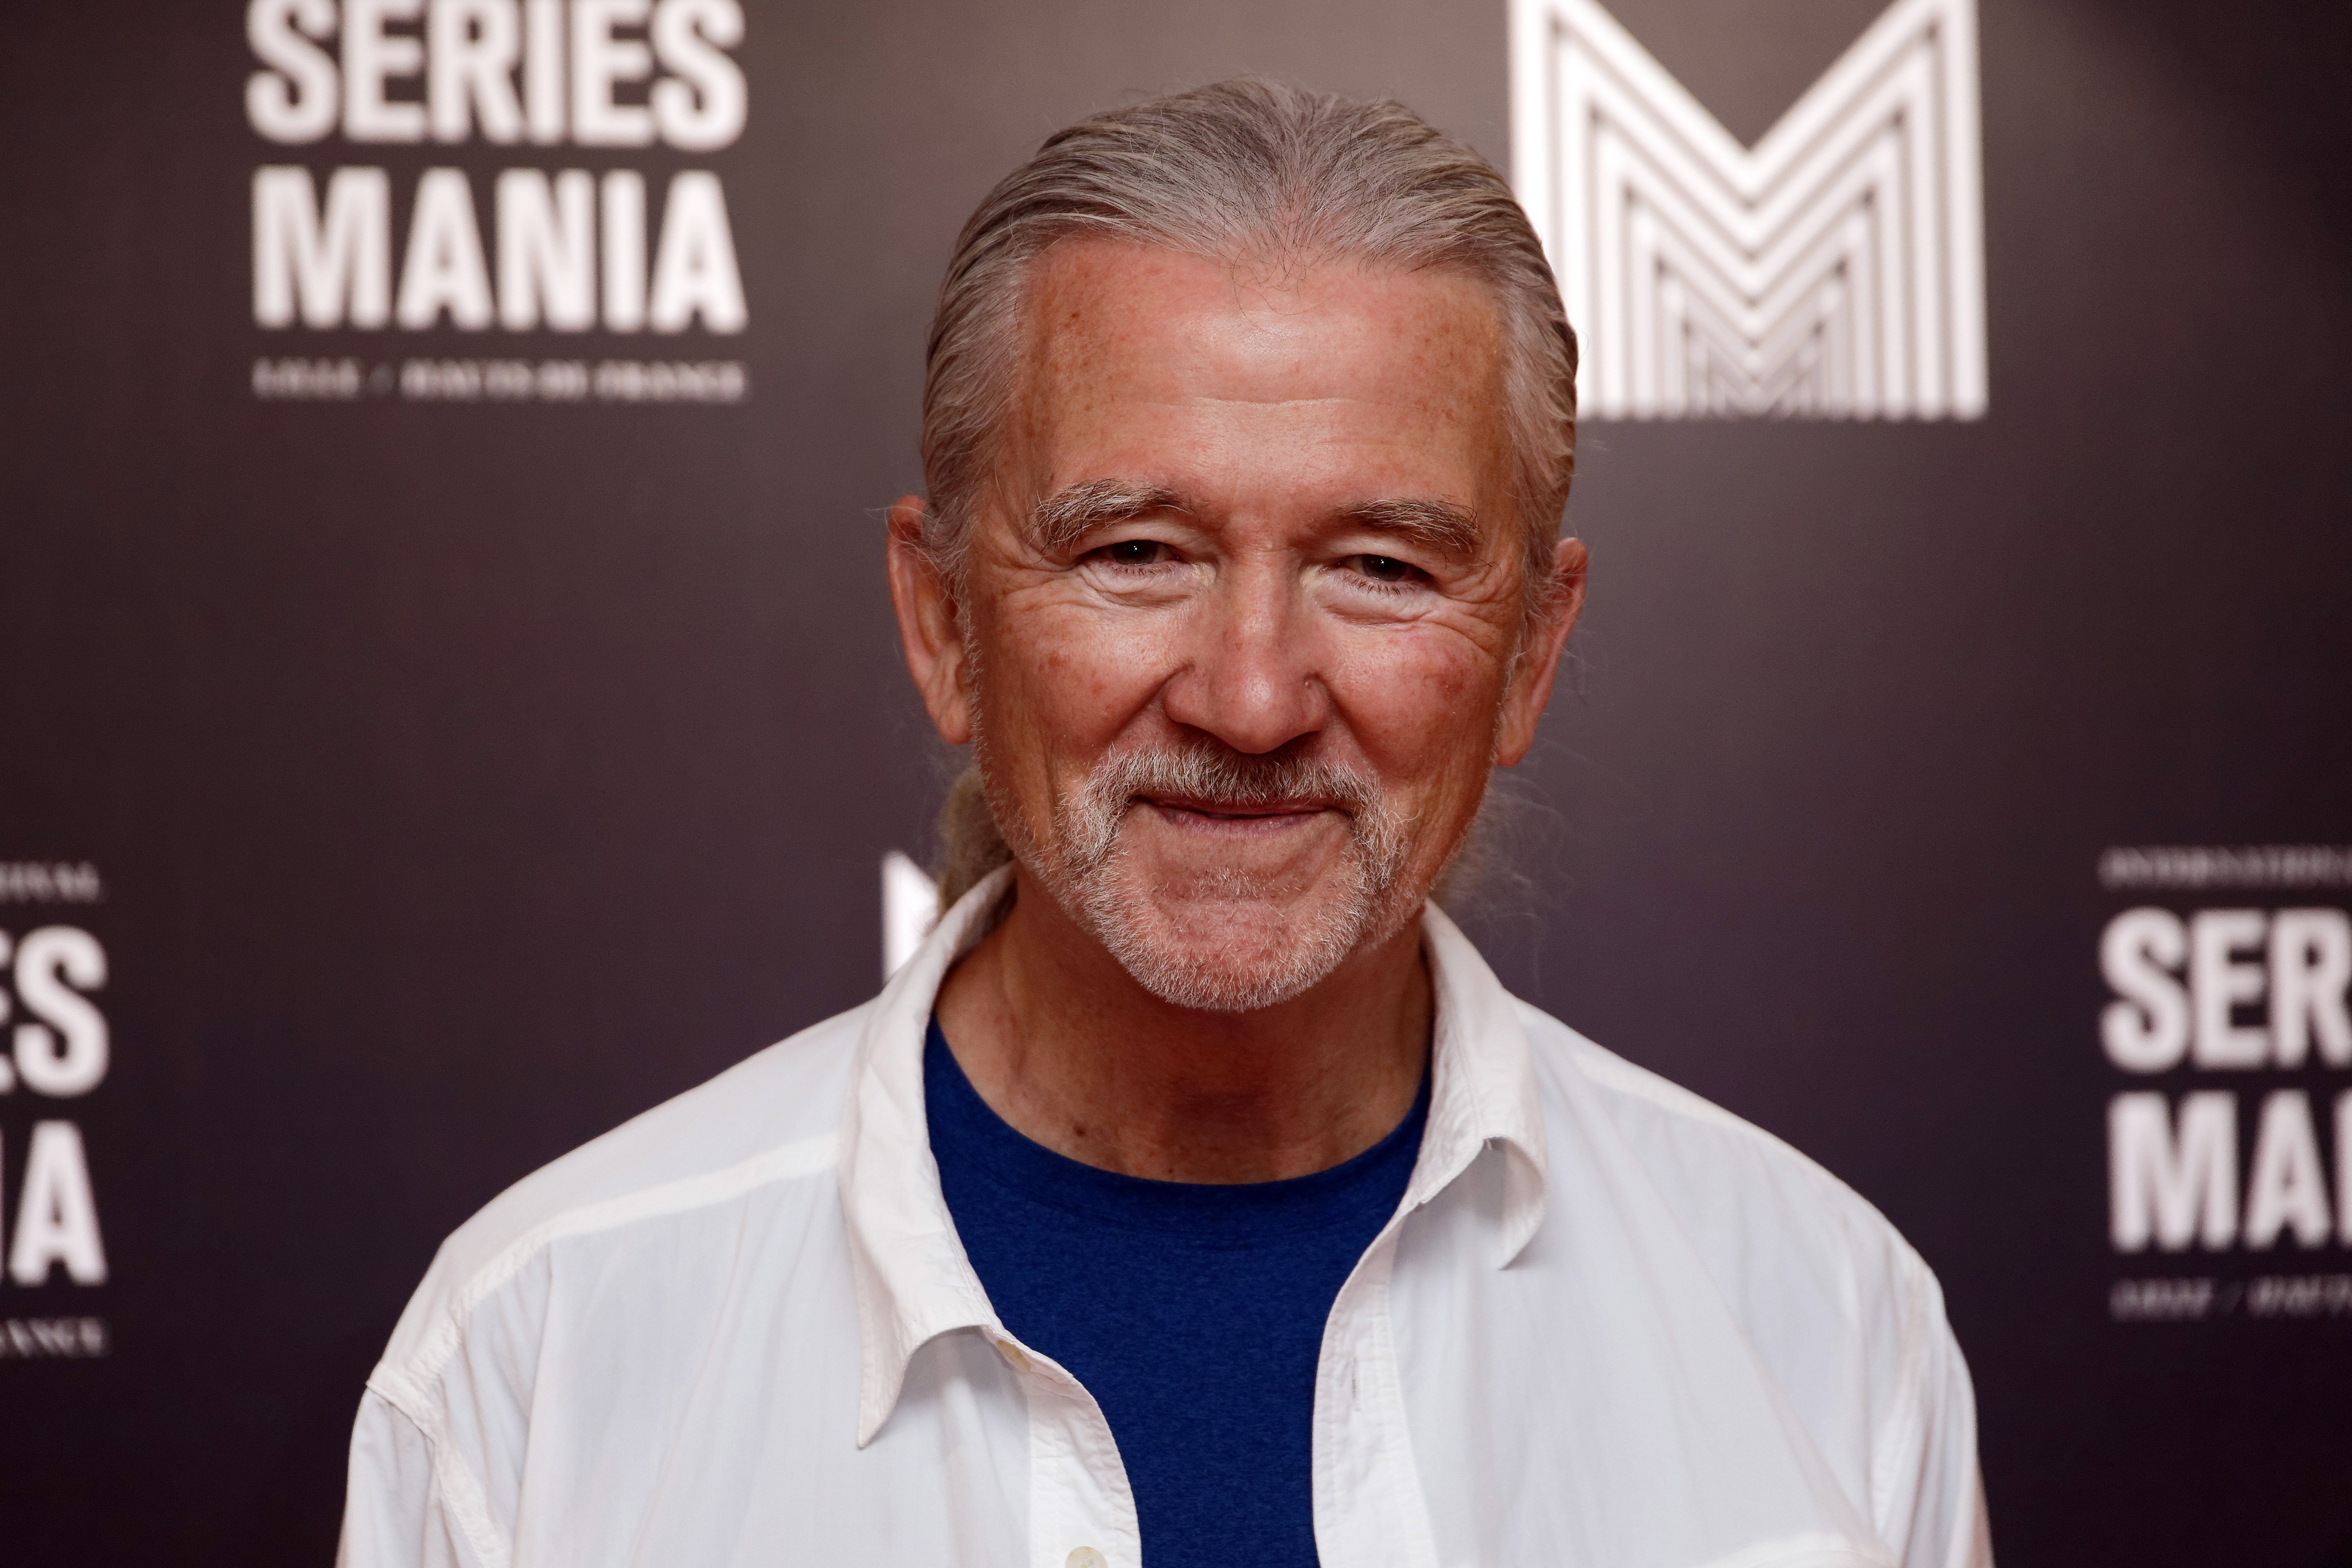 Patrick Duffy am 2. Mai 2018 in Lille, Frankreich | Quelle: Getty Images